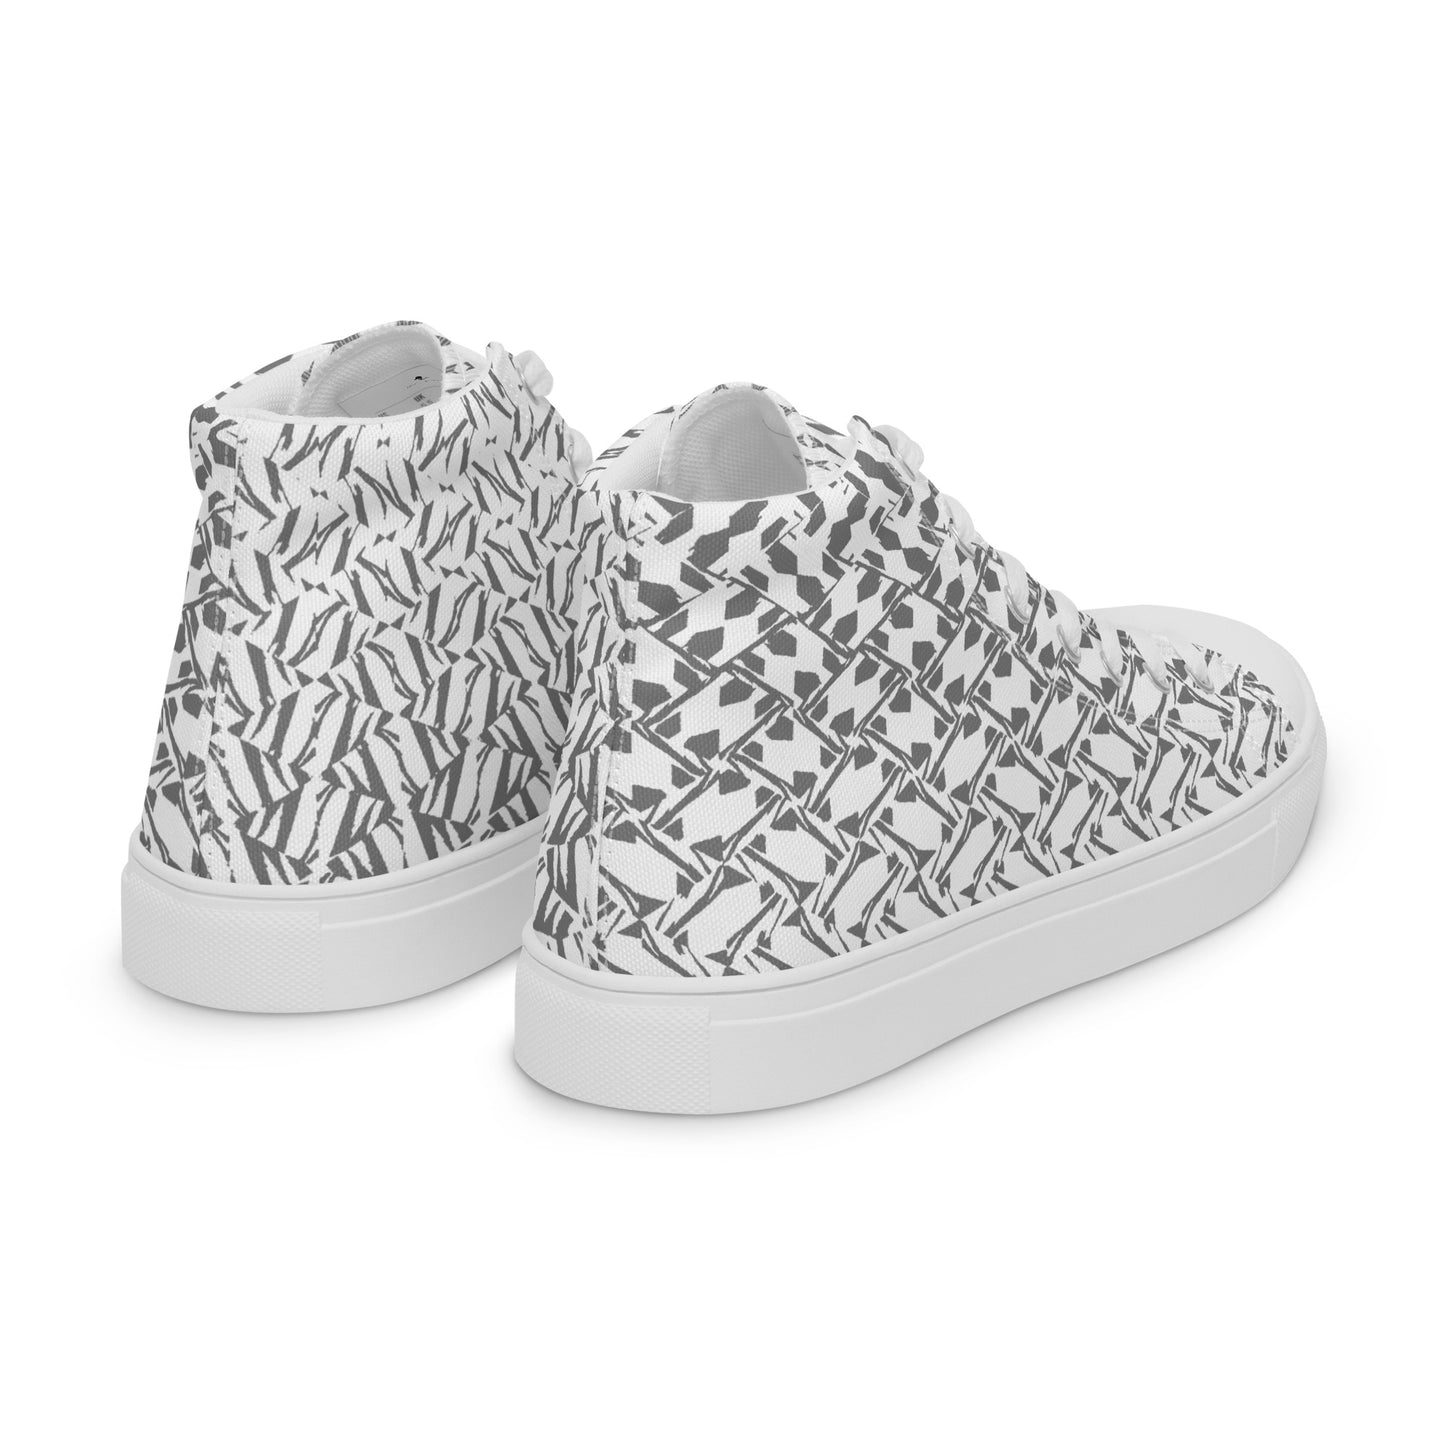 Women’s High Top Canvas Sneakers - Chaos